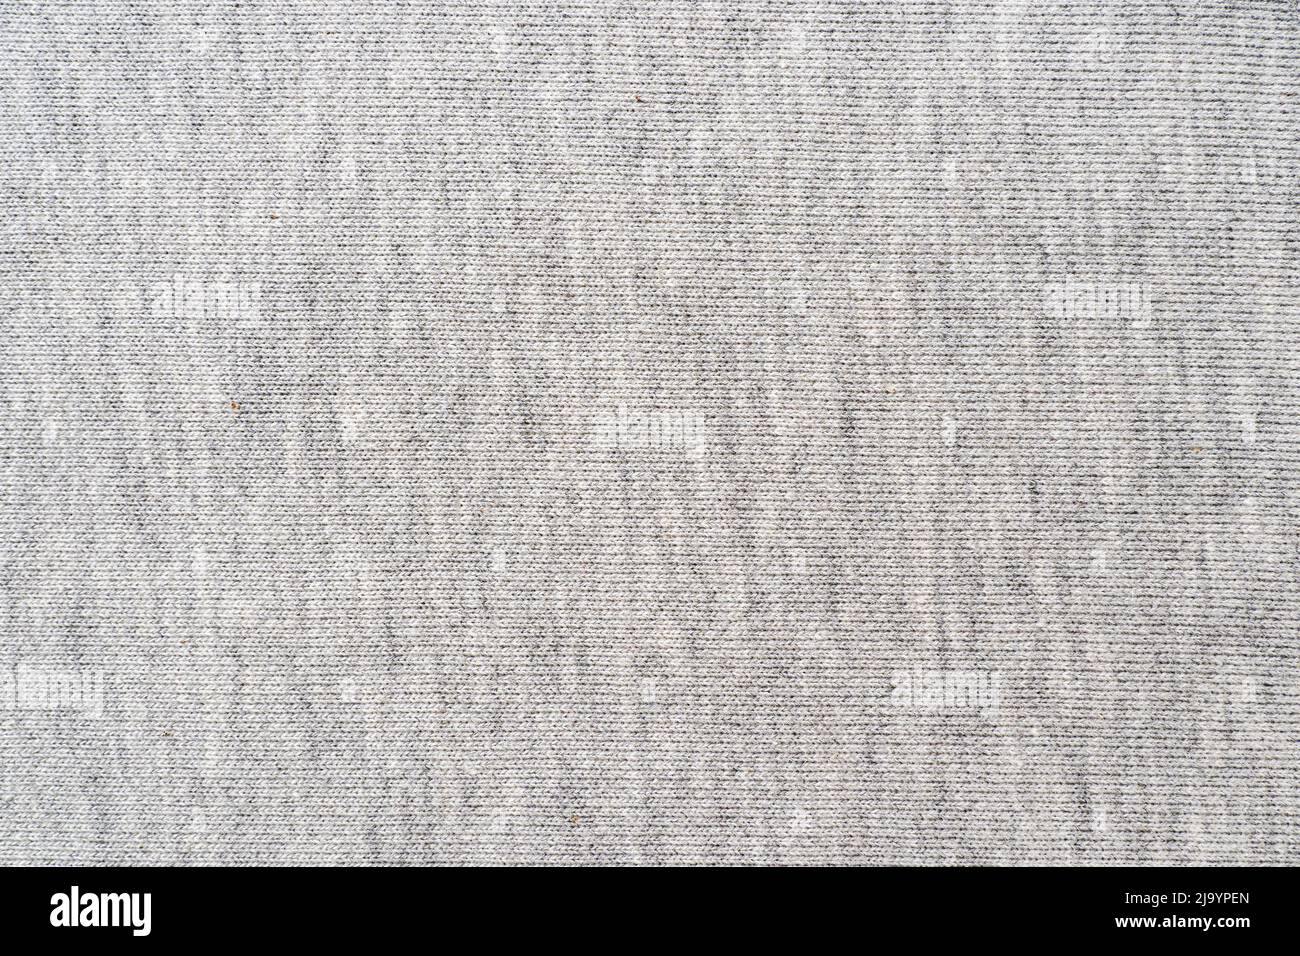 Large gray fabric texture or background, knitted cotton cloth, top view Stock Photo